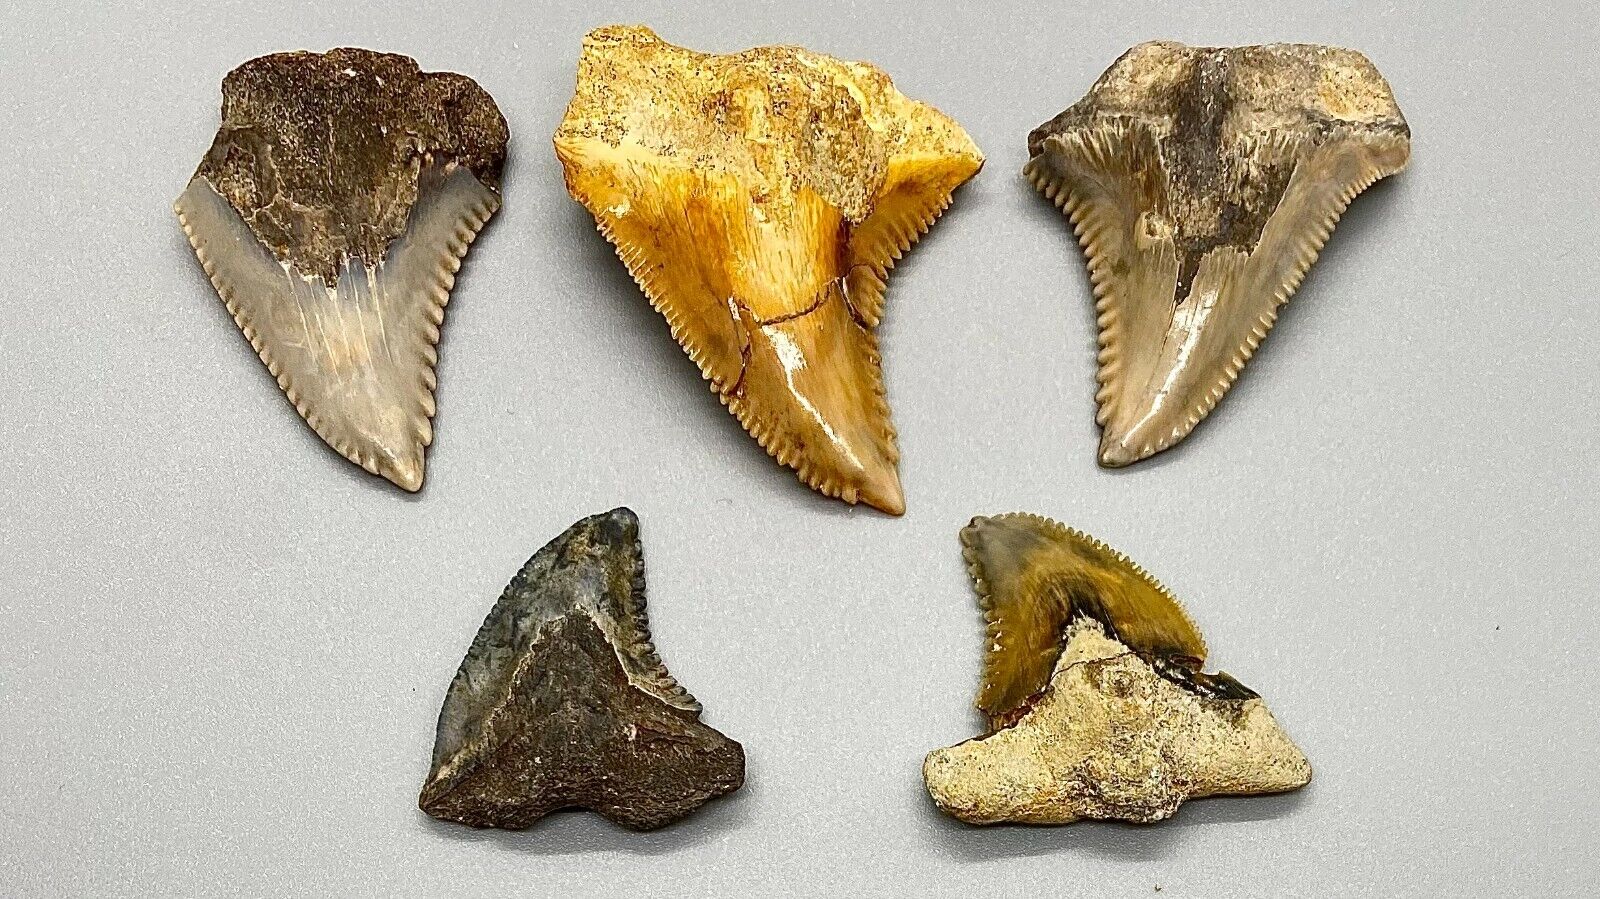 Group - 5 beautiful and colorful Fossil EXTINCT SNAGGLETOOTH Shark Teeth-Indo